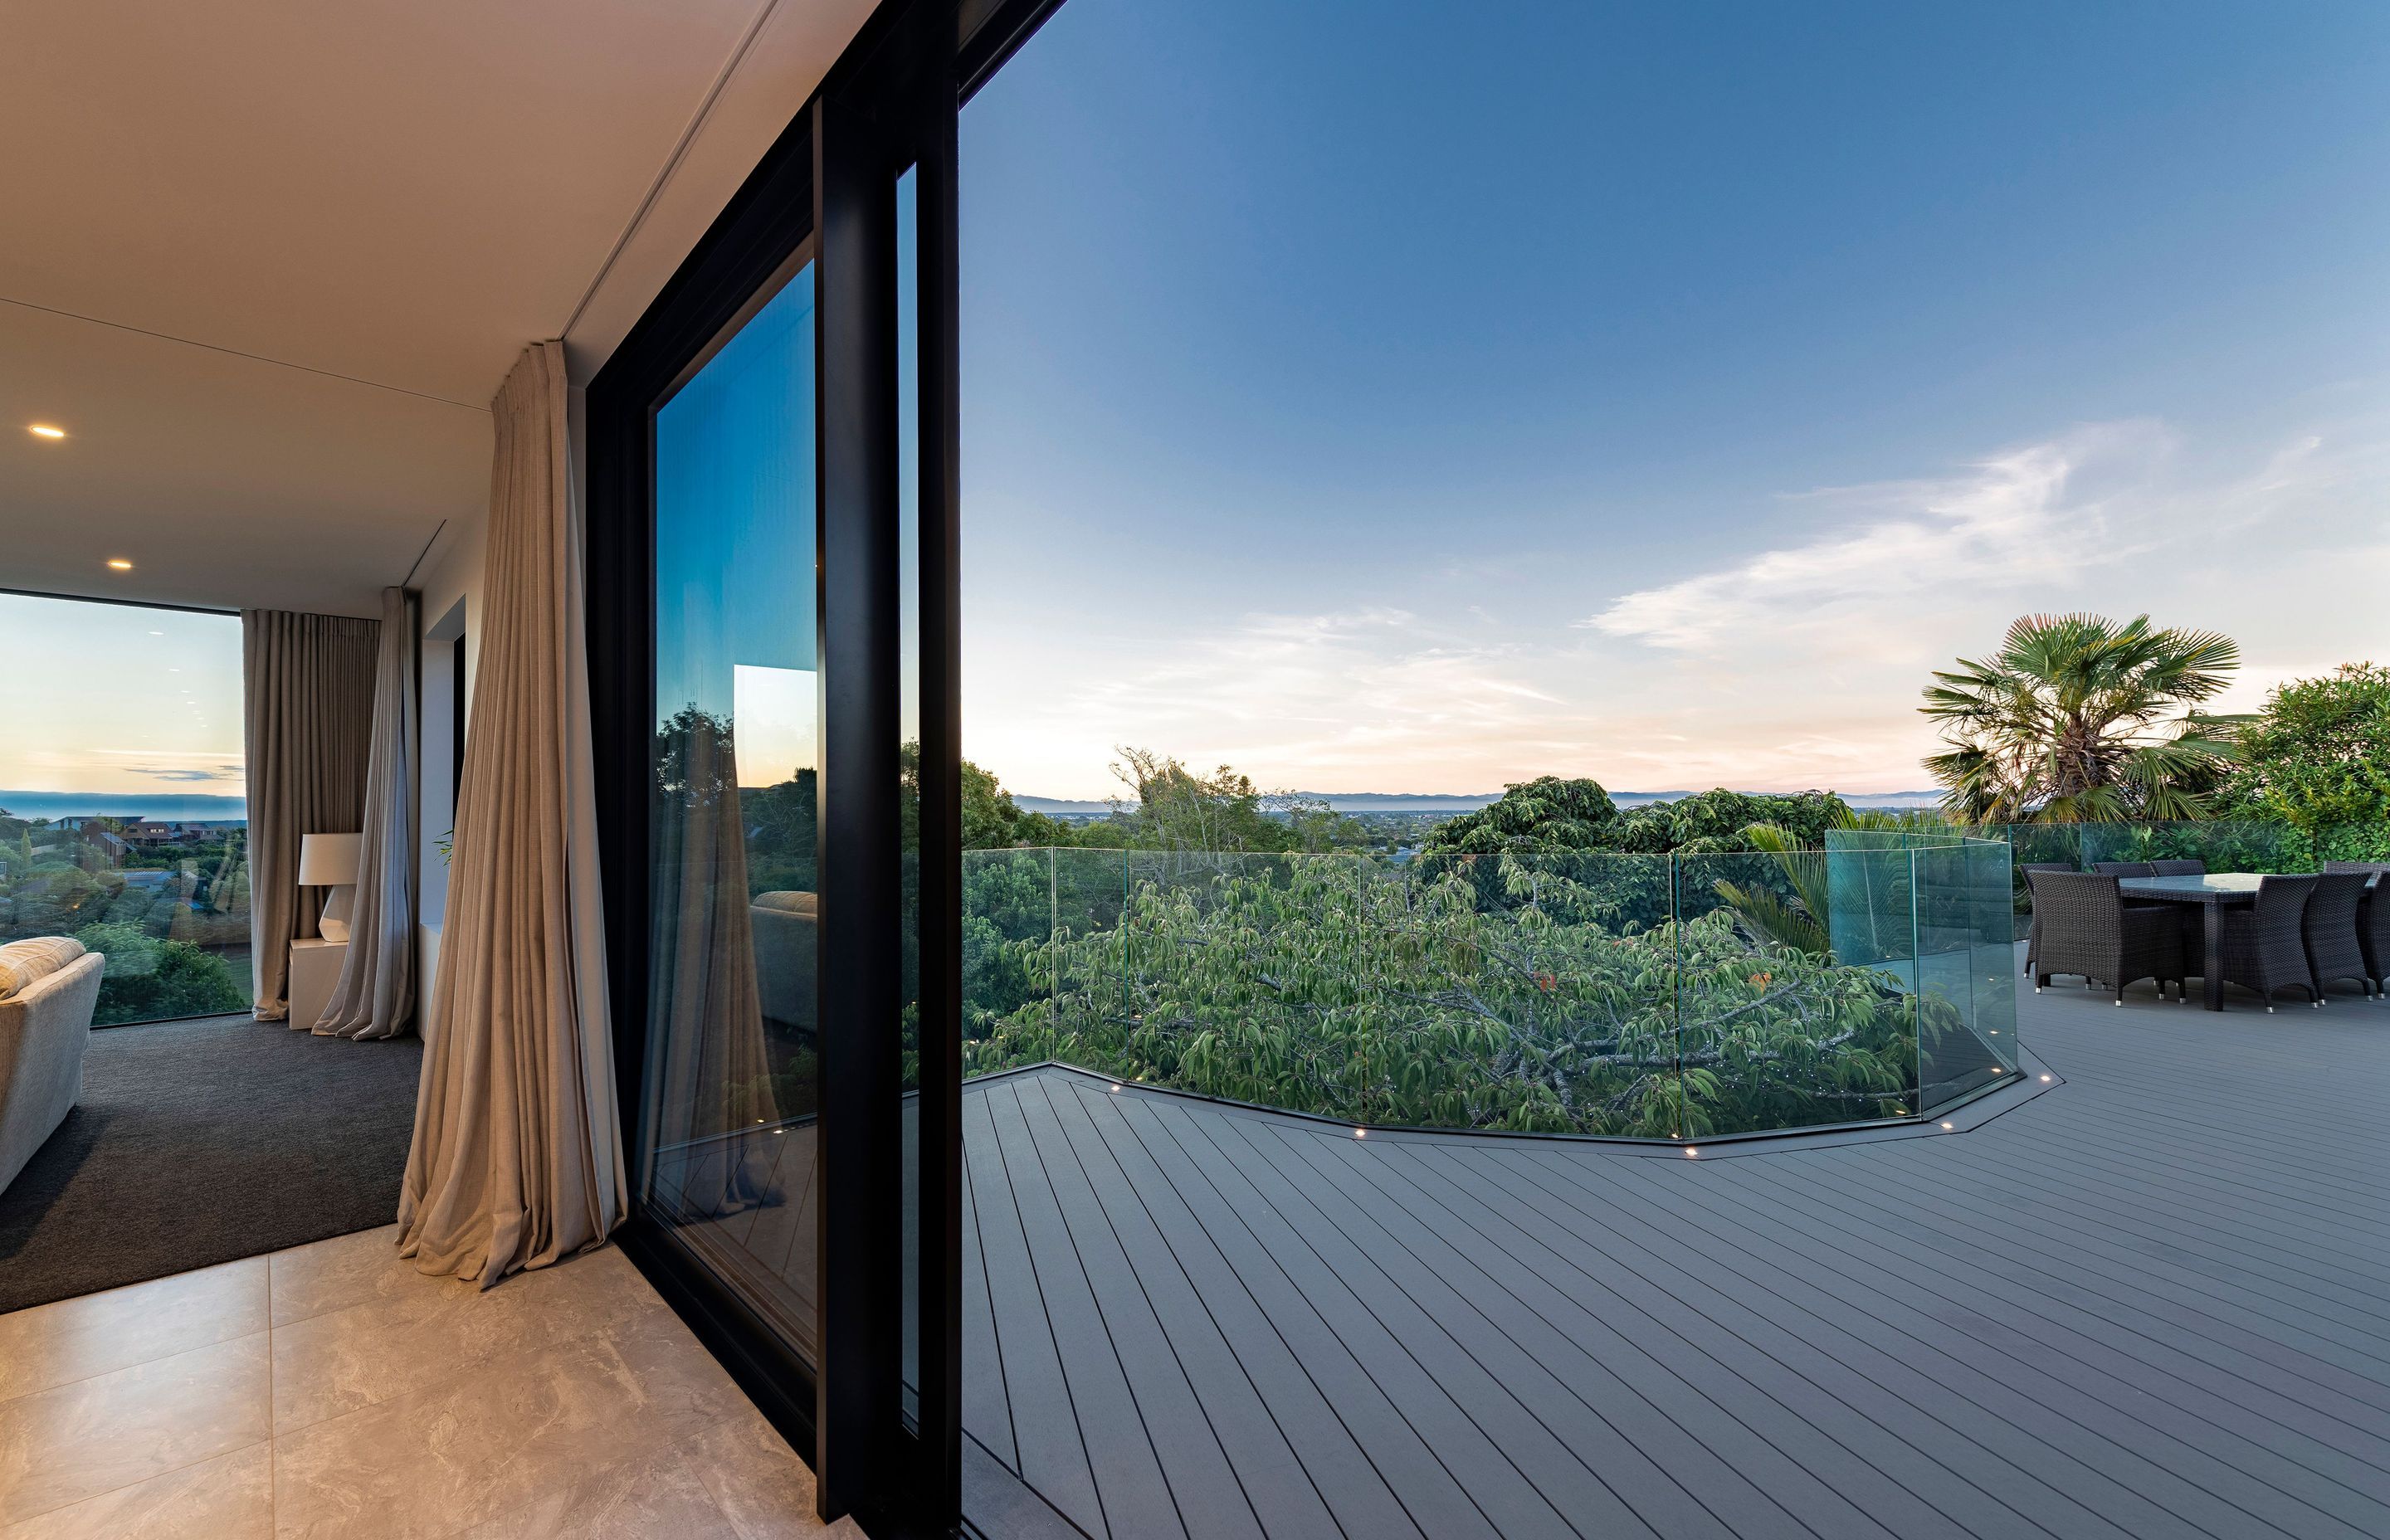 Sliding doors open the tiled living spaces up to the view and the horizon in the distance.